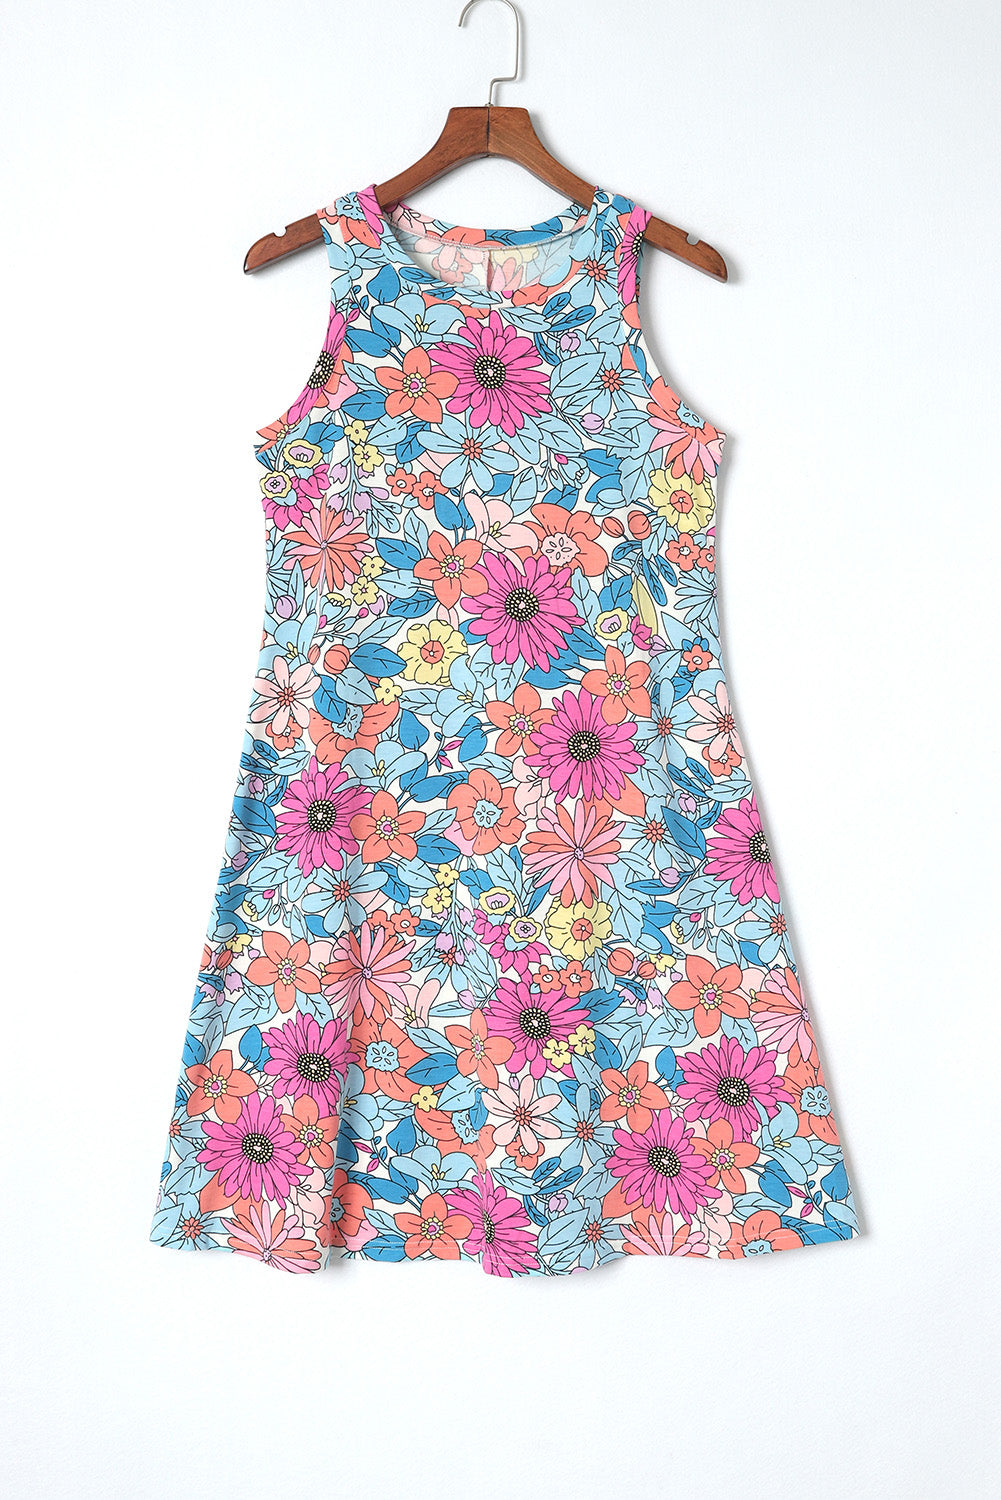 Chic Floral Sleeveless Dress: Perfect for Summer Beach Weddings and Parties!